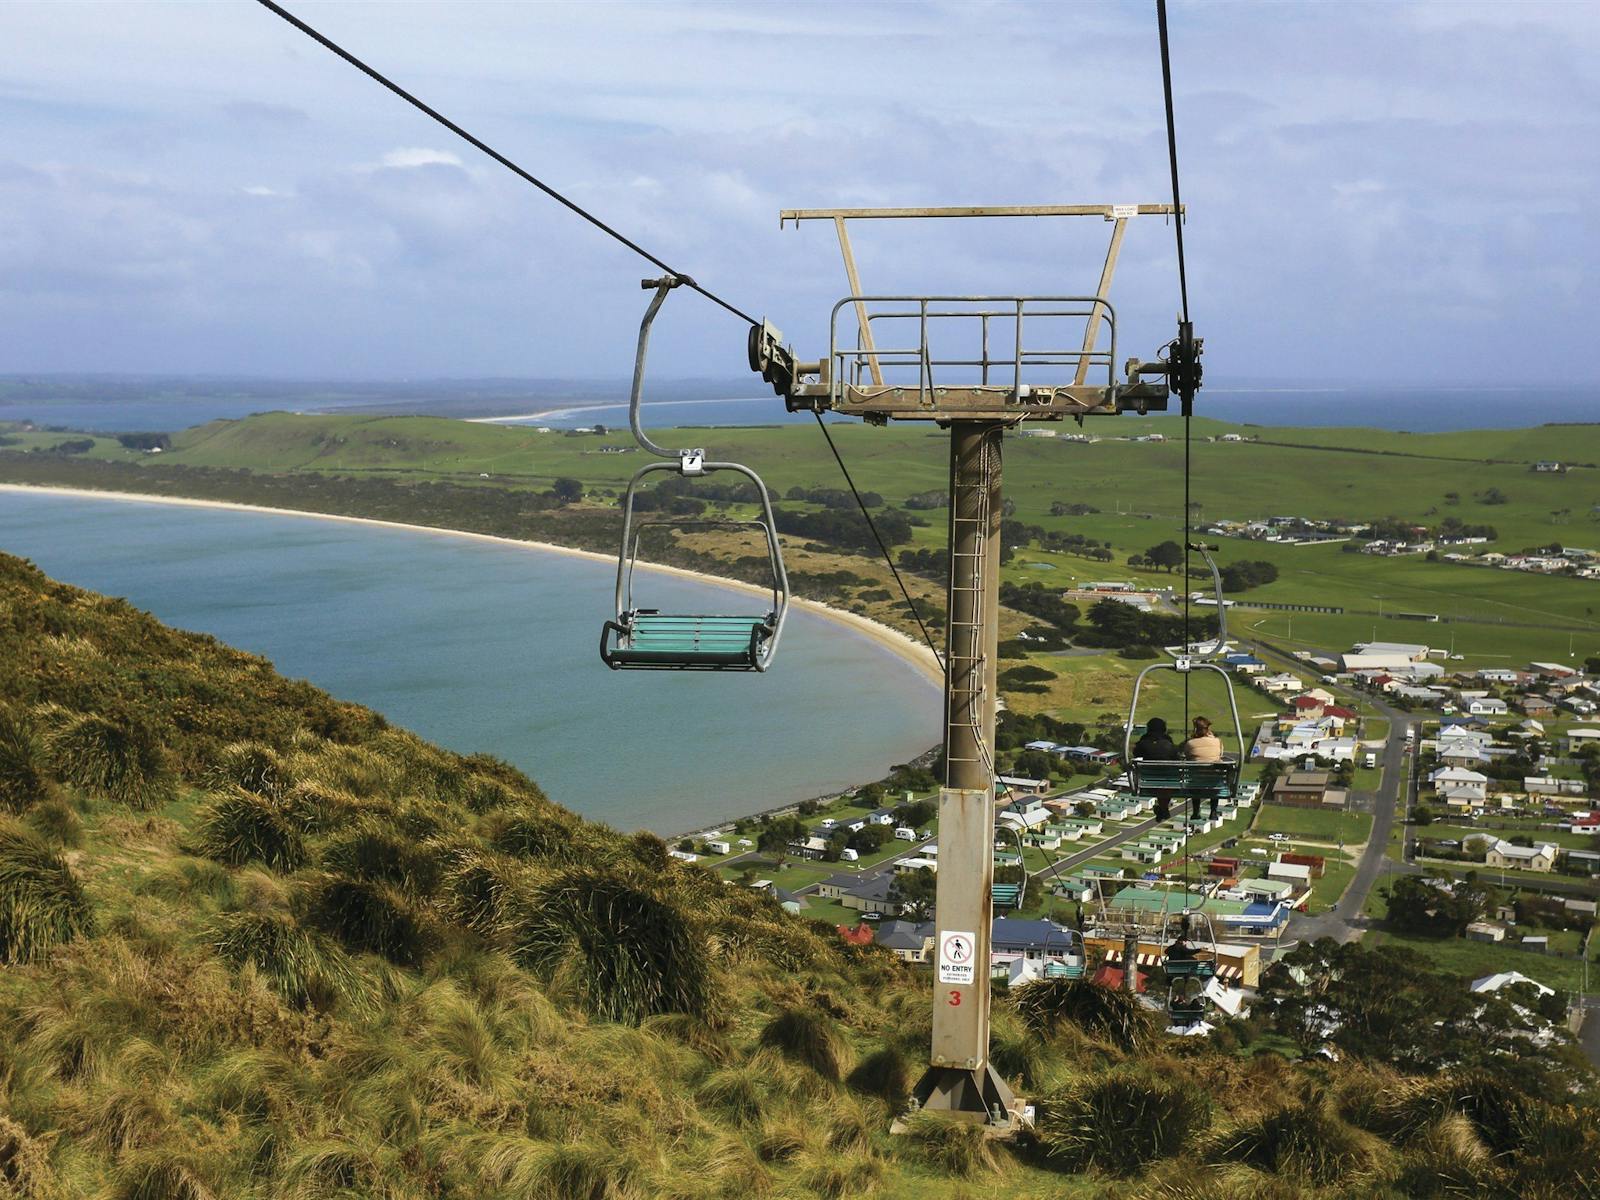 The Nut Chairlift